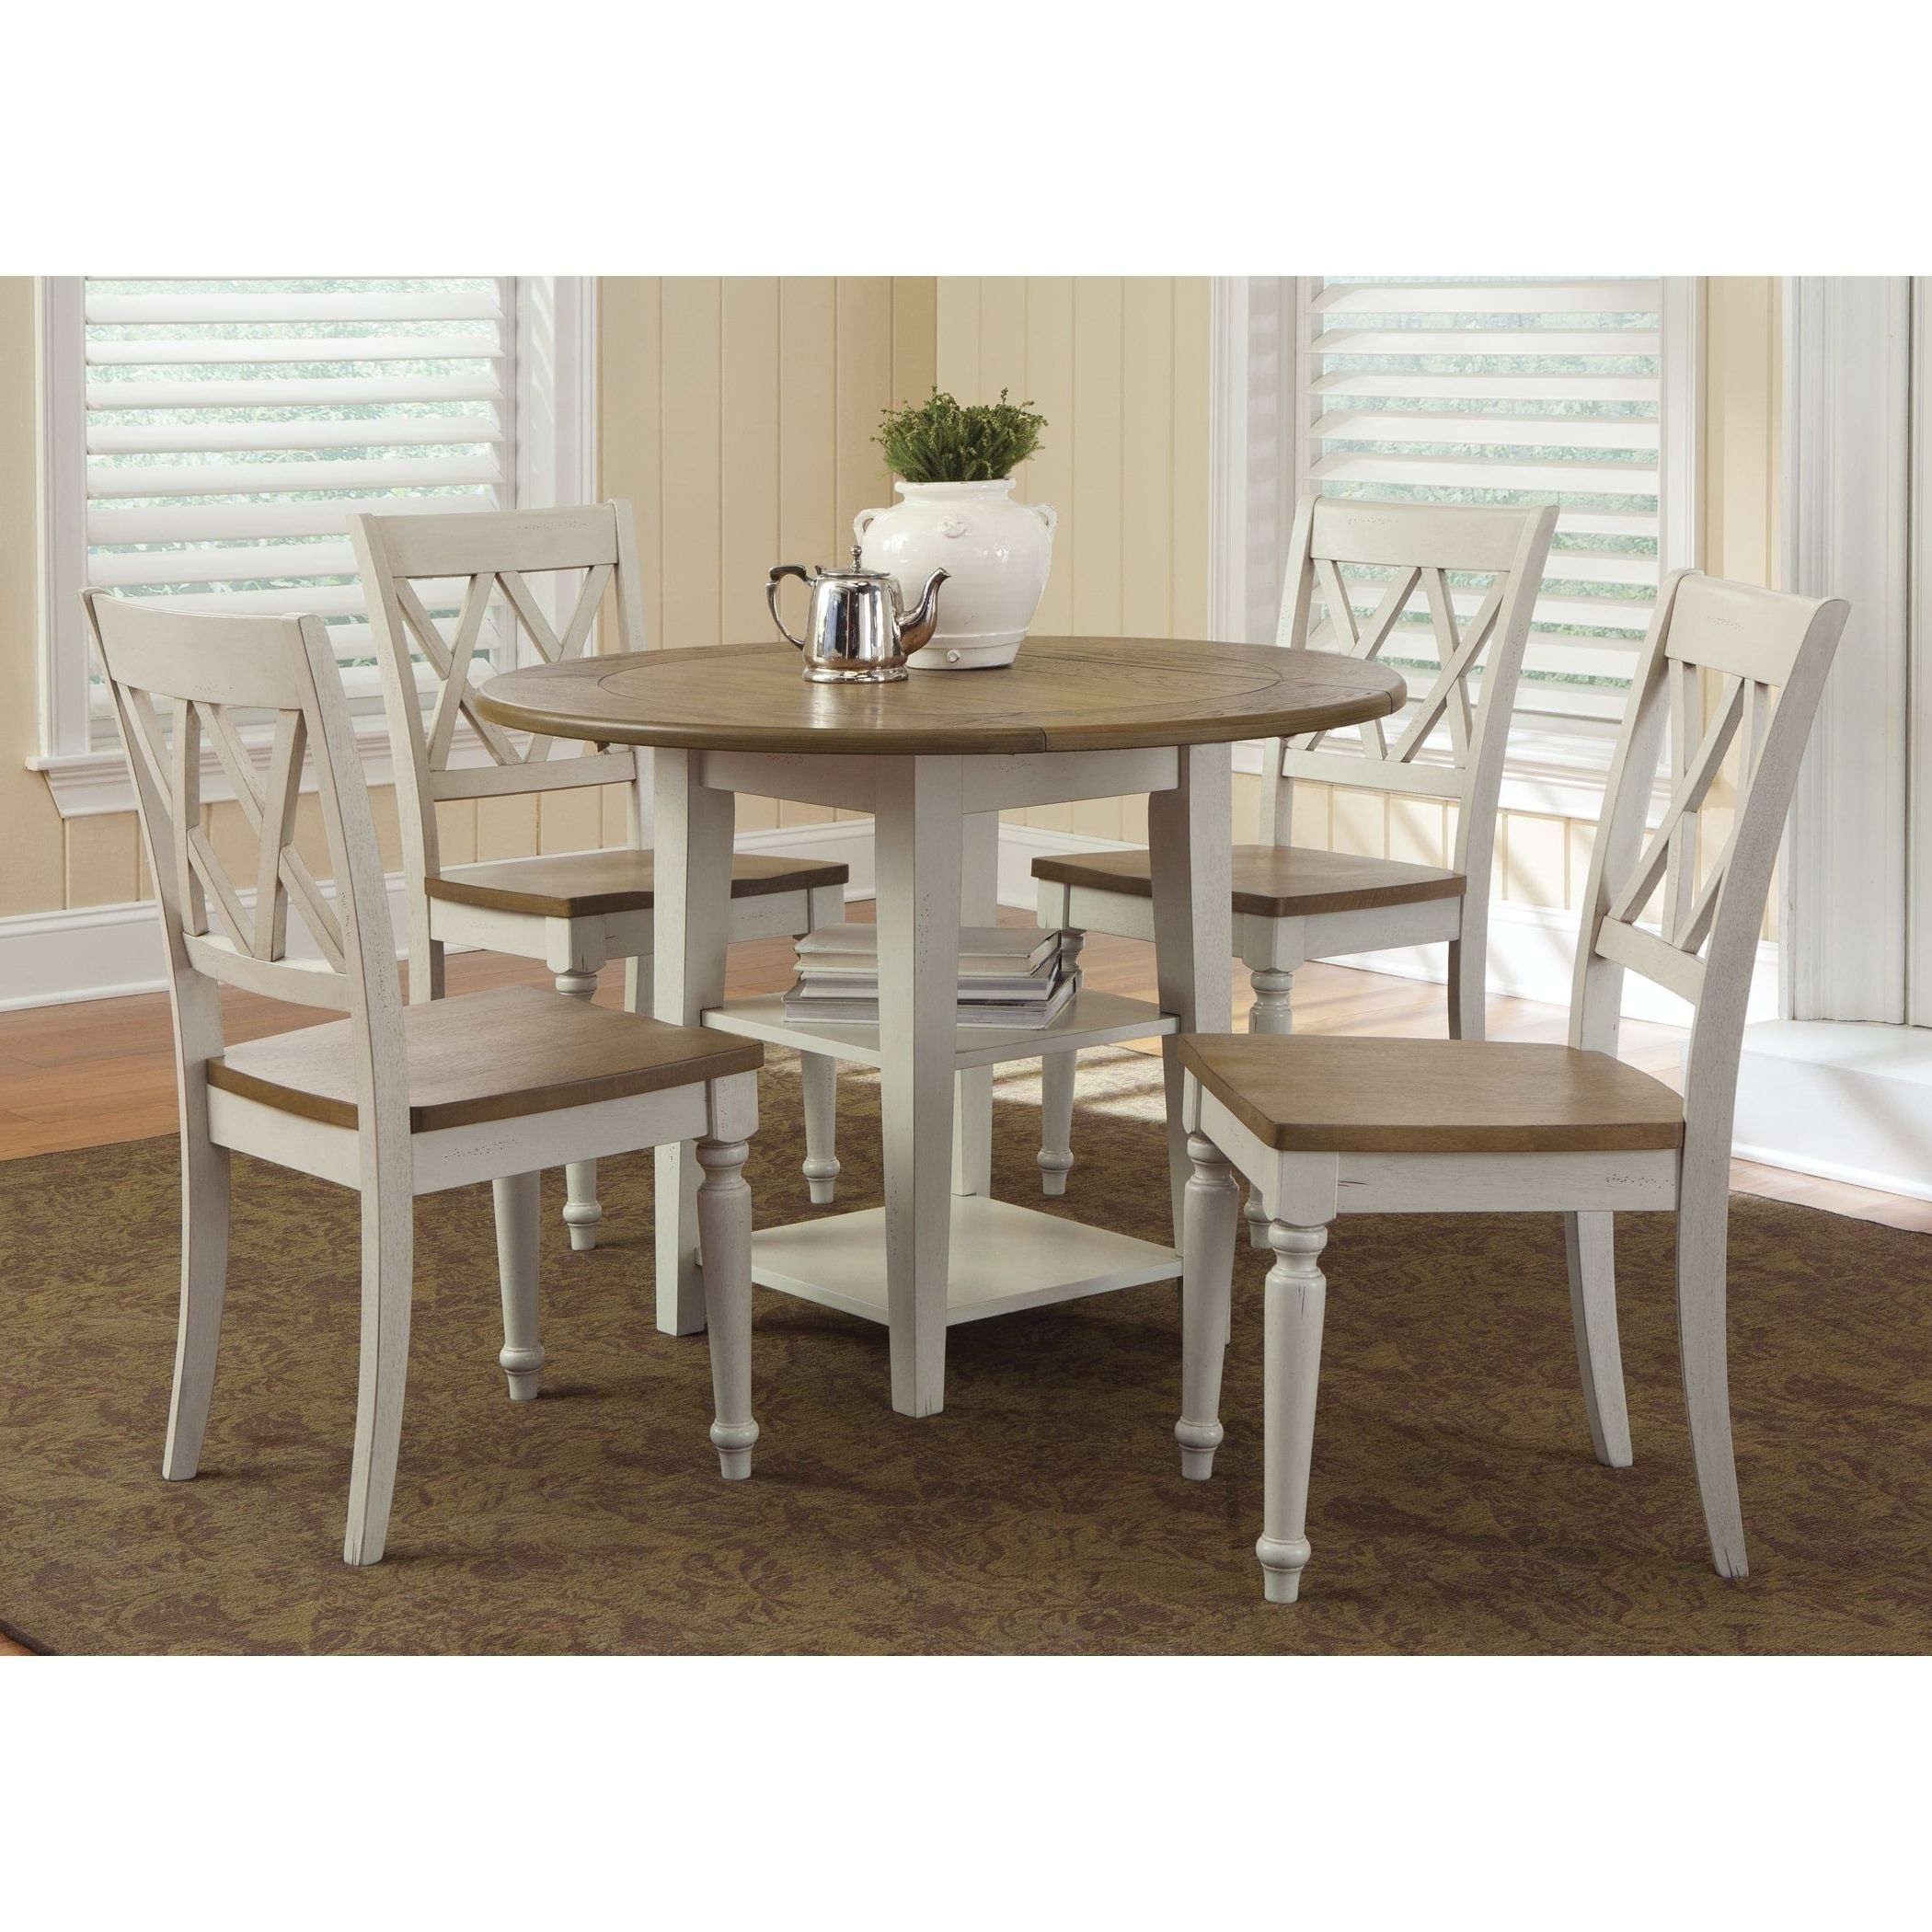 Transitional Drop Leaf Casual Dining Tables Inside Preferred Al Fresco Two Tone Transitional Drop Leaf Leg Table – Antique White (Photo 1 of 25)